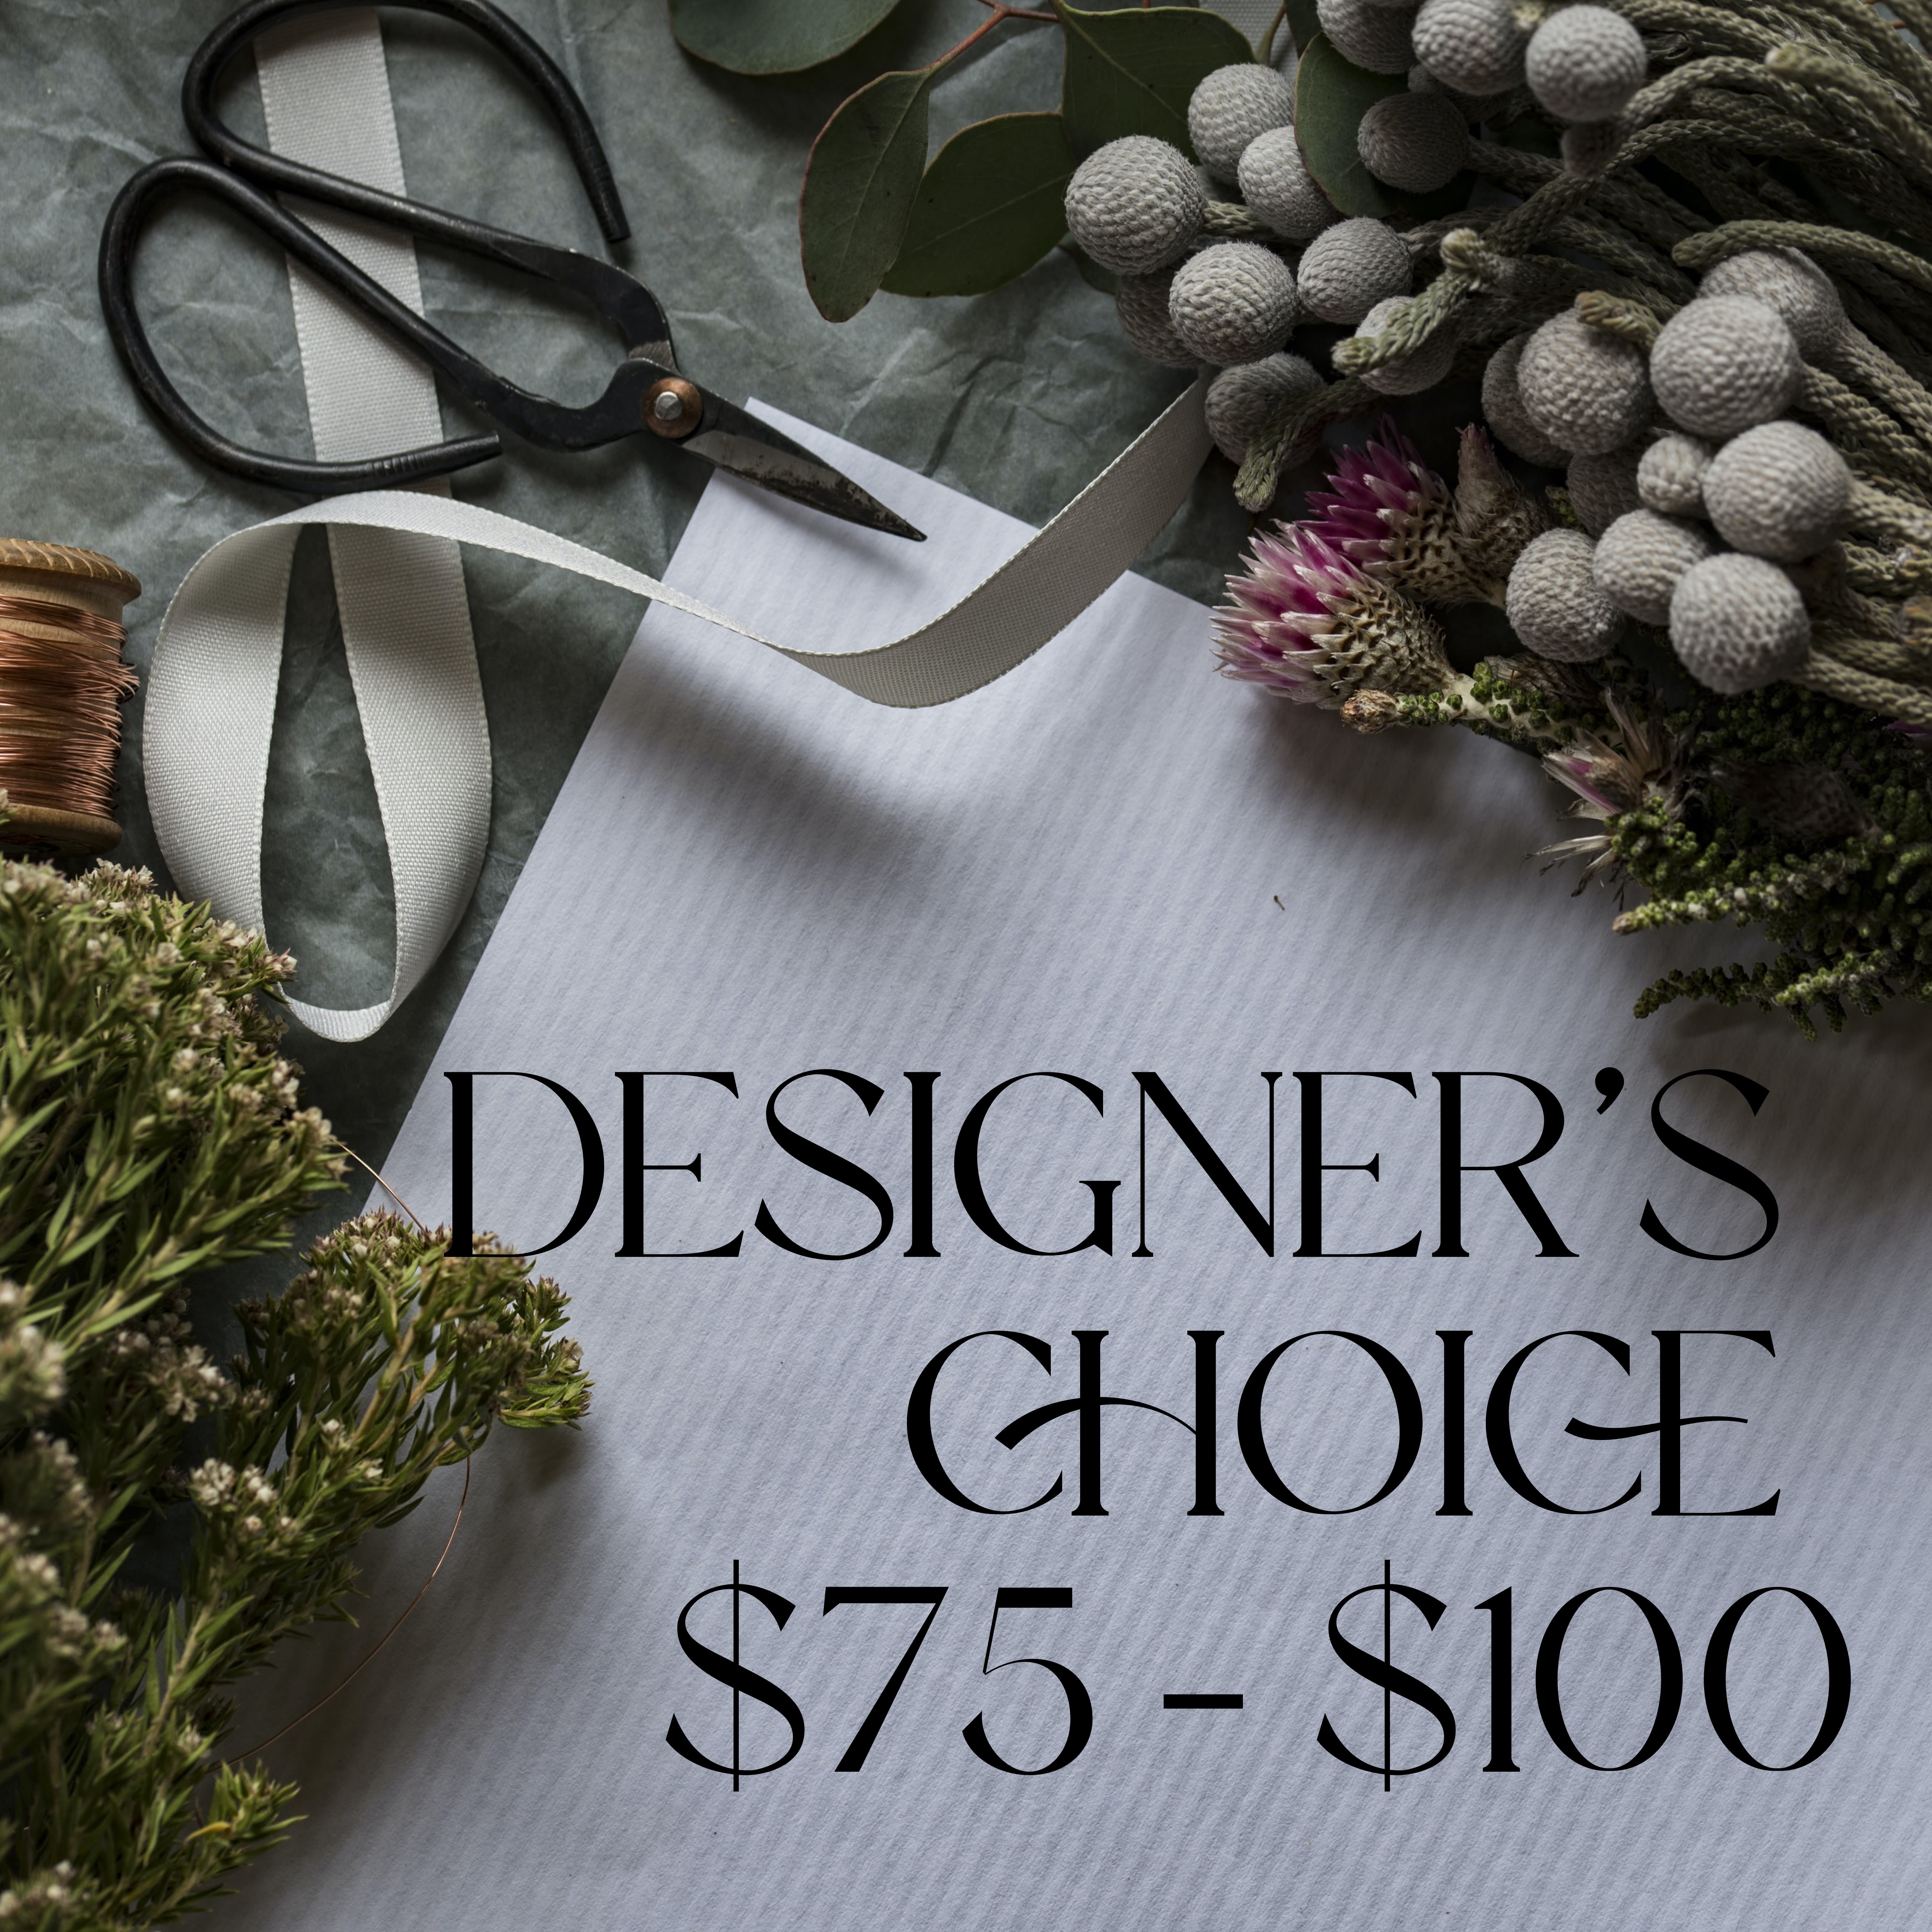 Designer Choice Premium - Leave it to our talented team to design something beautiful with our best seasonal flowers!  Please let us know of any special requests.